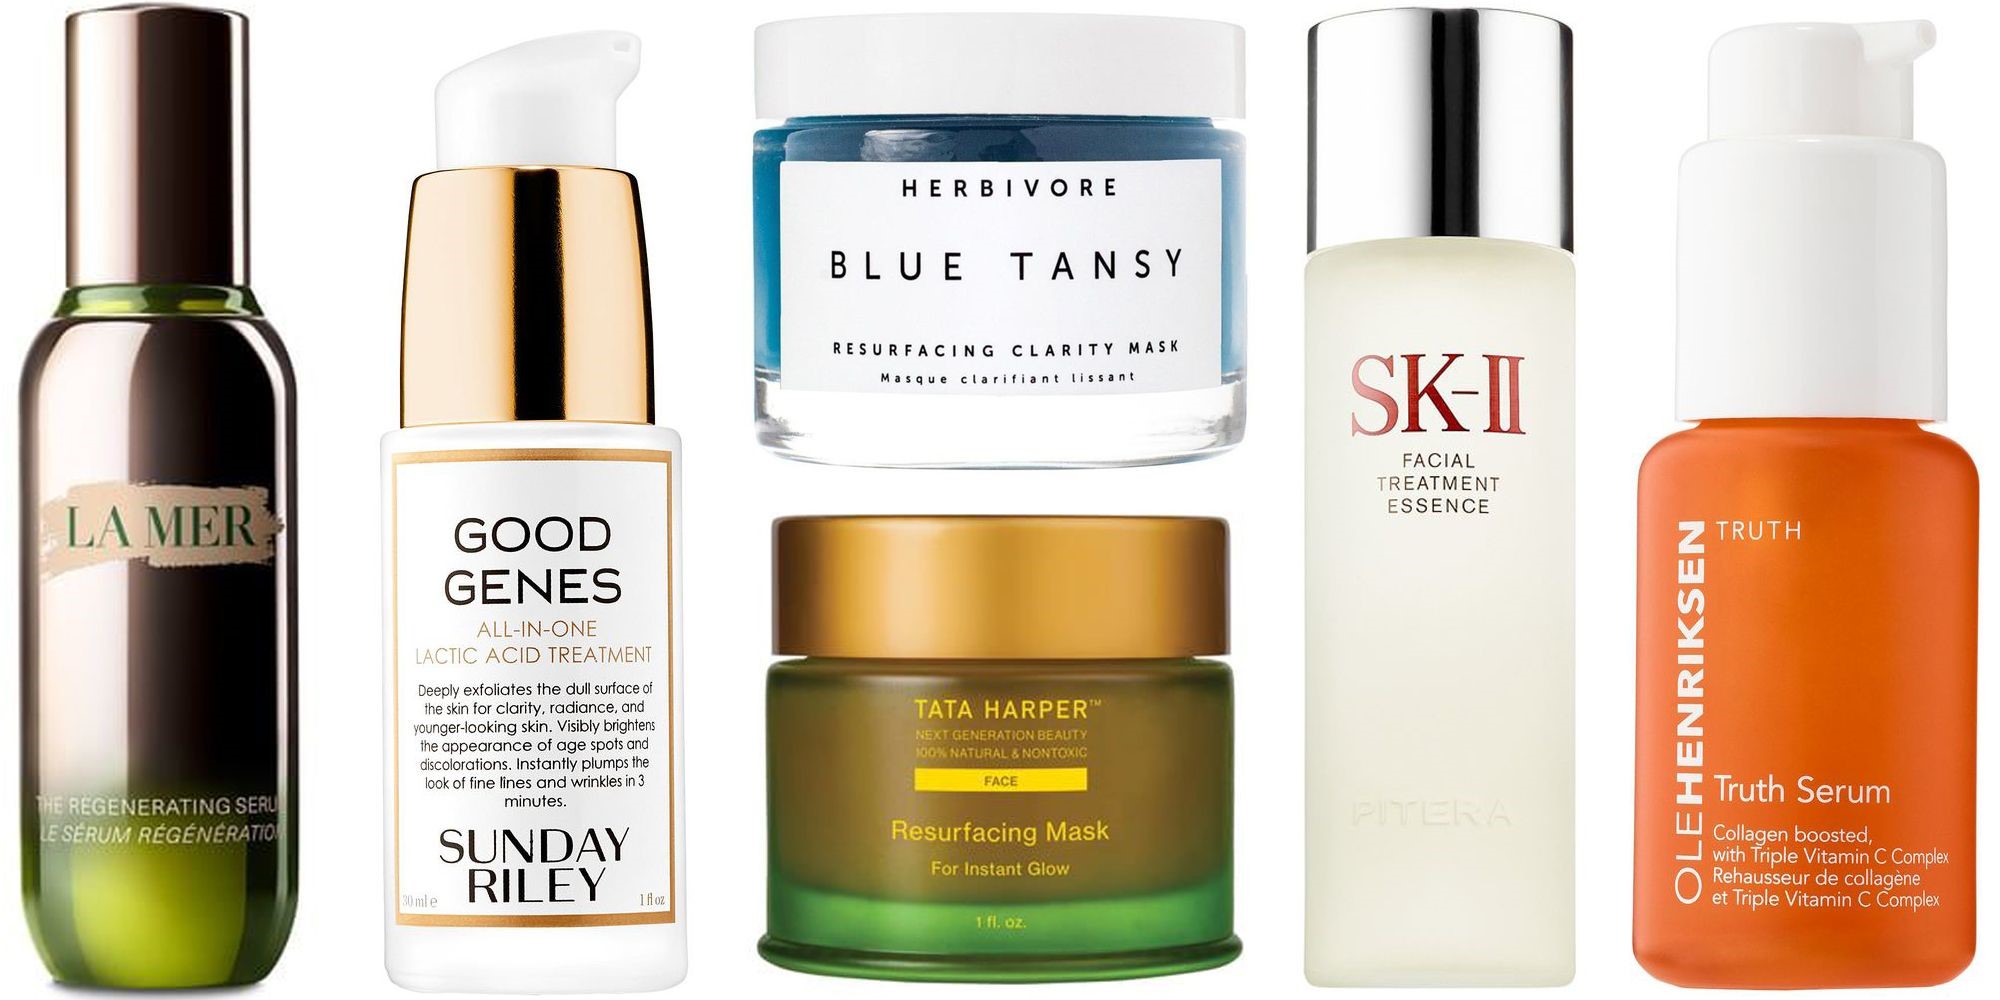 Top 9: Most Useful Skin Care Products